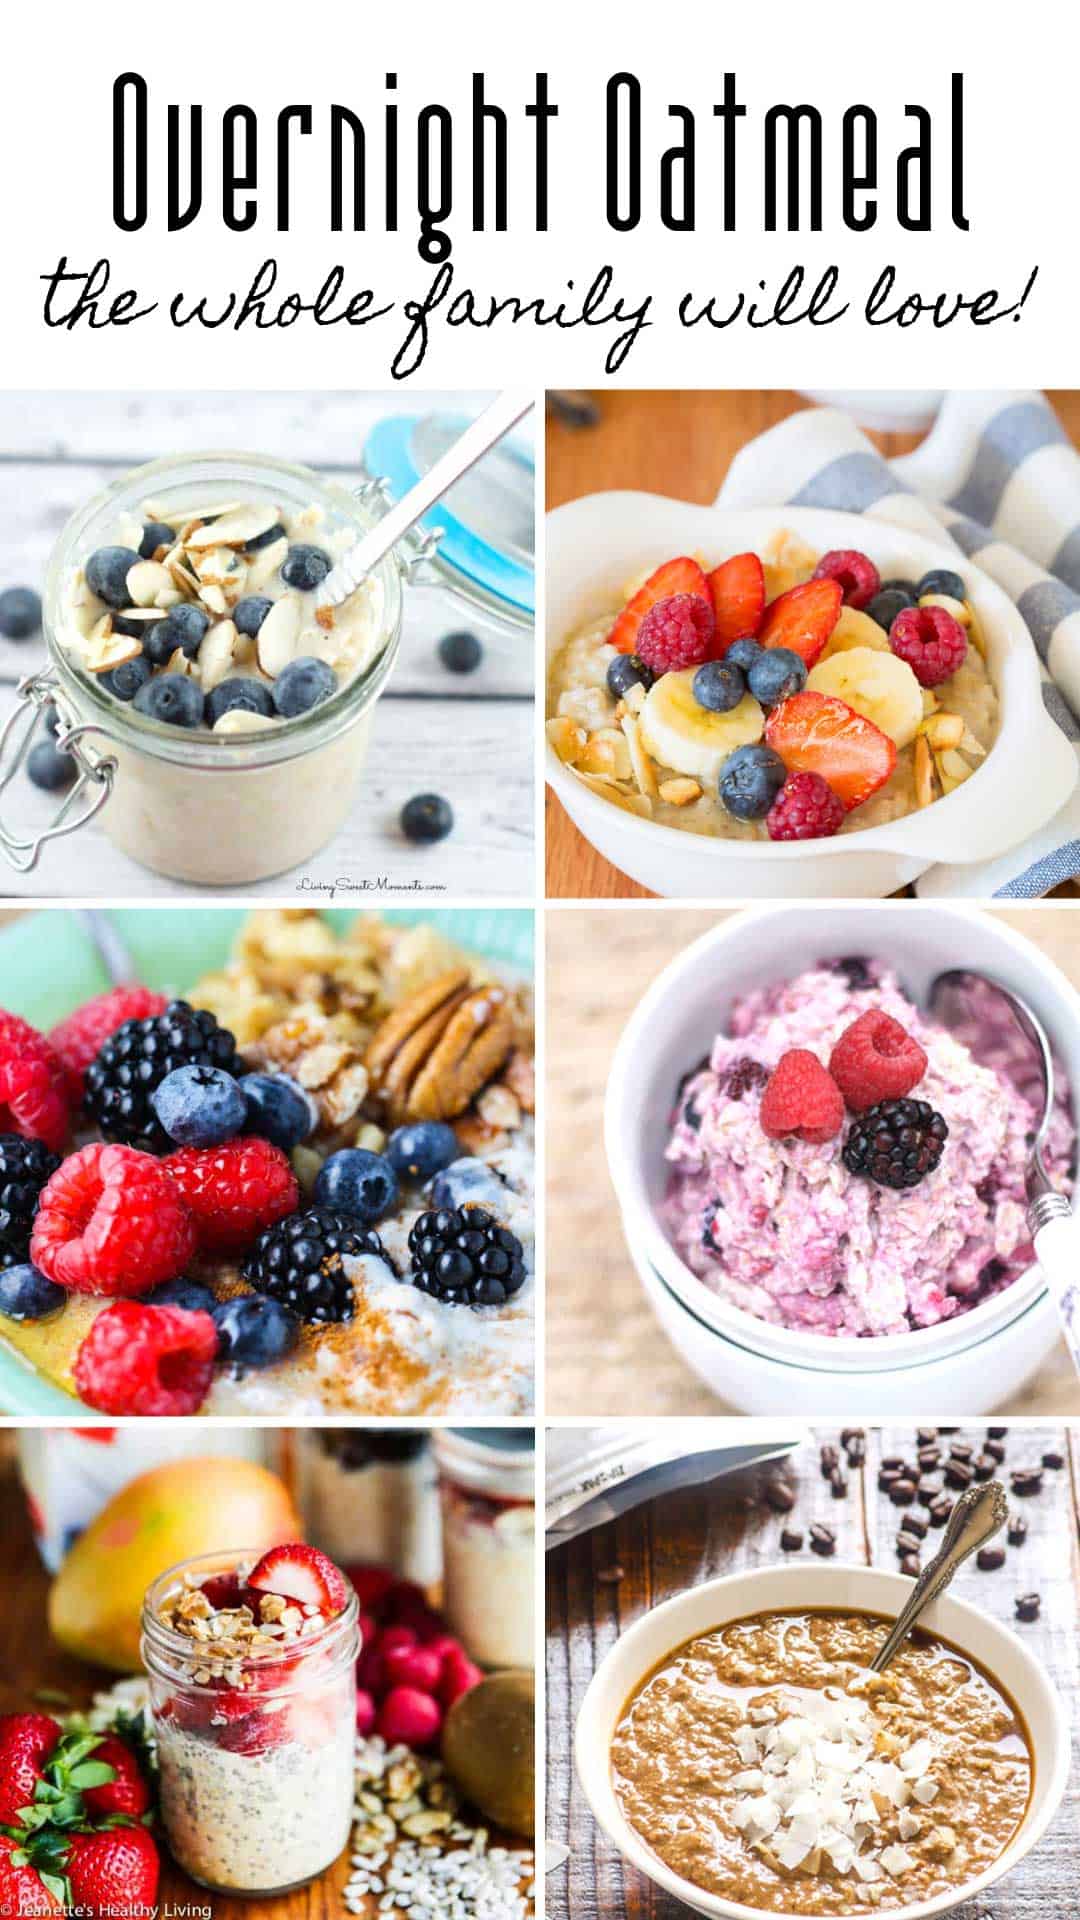 One whole month of overnight oats recipes that you can use for your meal prep breakfasts for the whole family! #breakfast